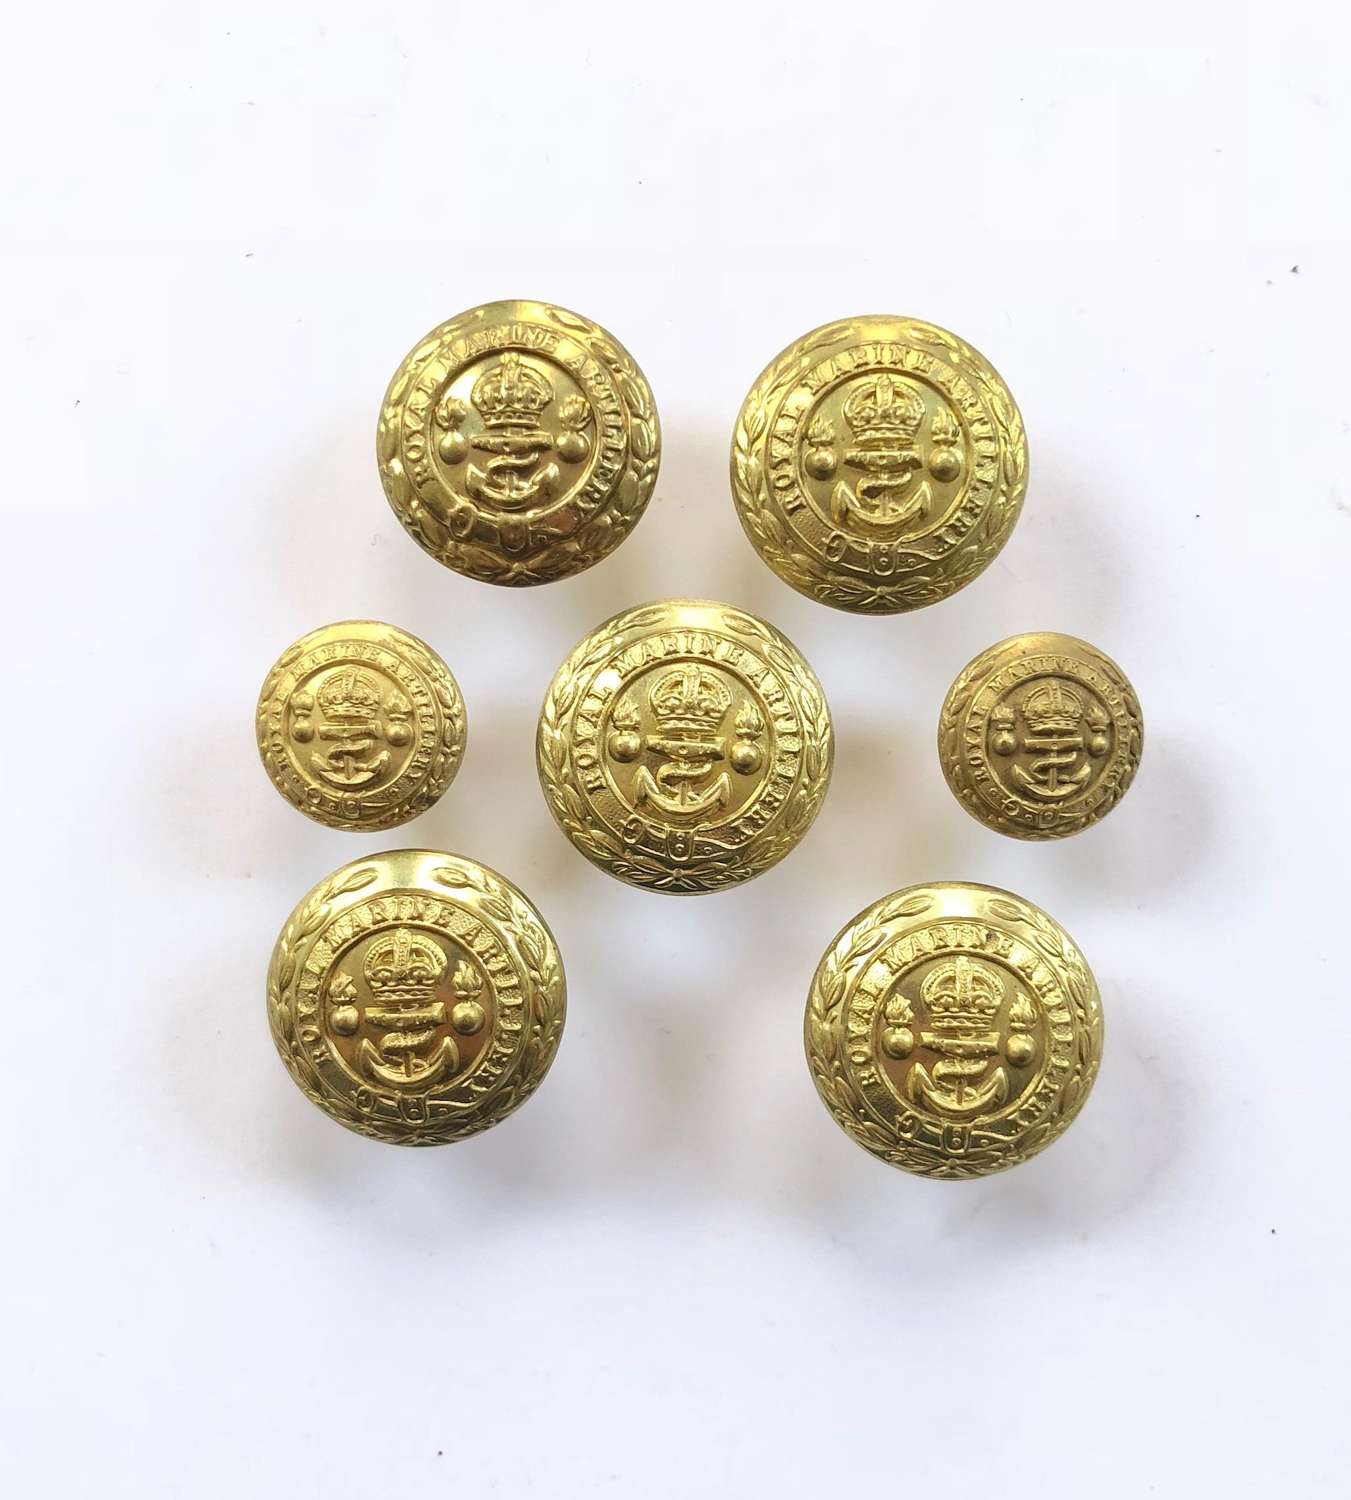 WW1 Pattern Royal Marine Artillery Other Ranks Buttons.